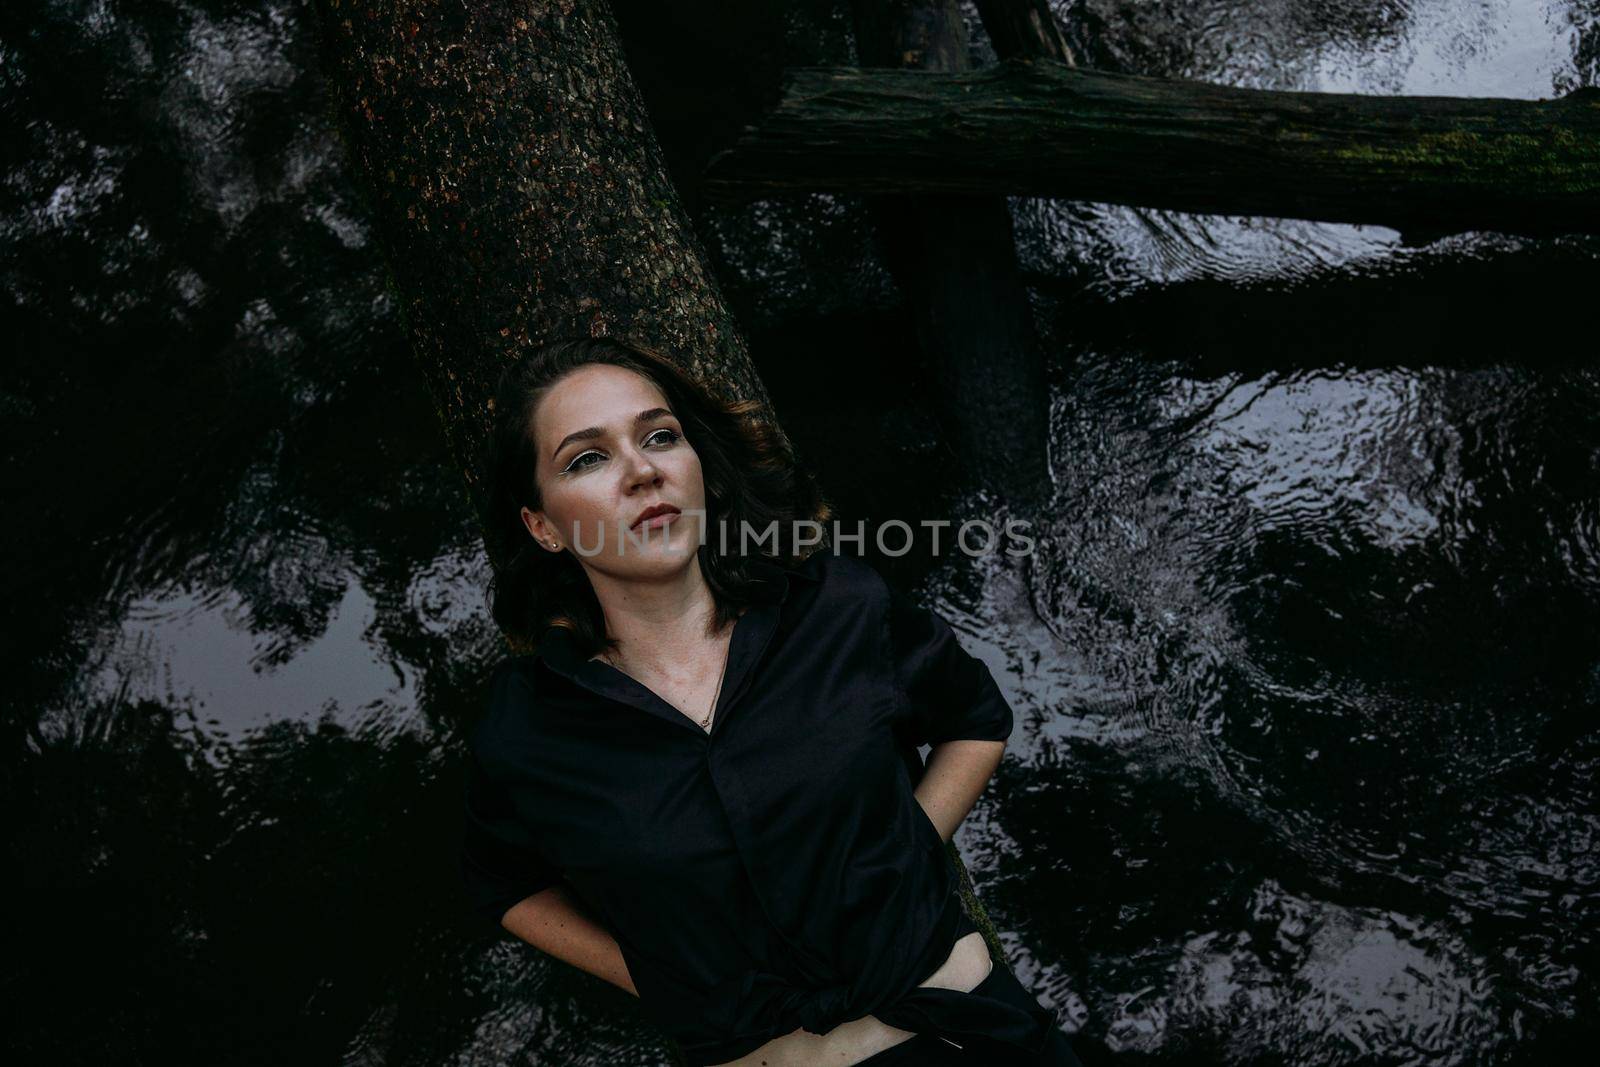 Woman in black clothes on a background of water, lies on a tree. Photo in the forest, the atmosphere of sadness and depression